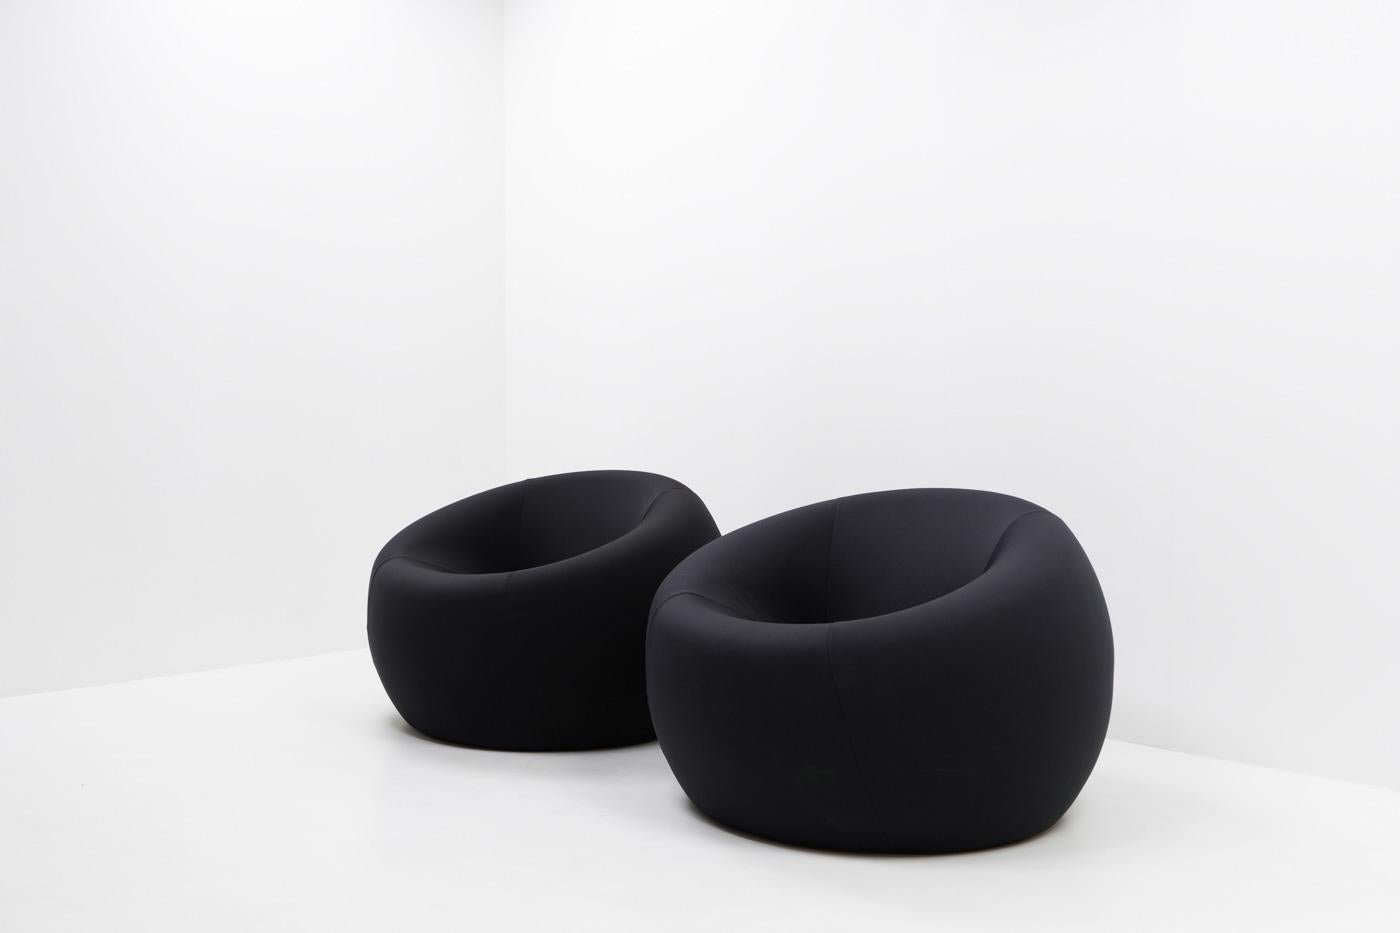 Italian Design UP1 Lounge Chairs by Gaetano Pesce for B&B Italia, 2000s For Sale 7